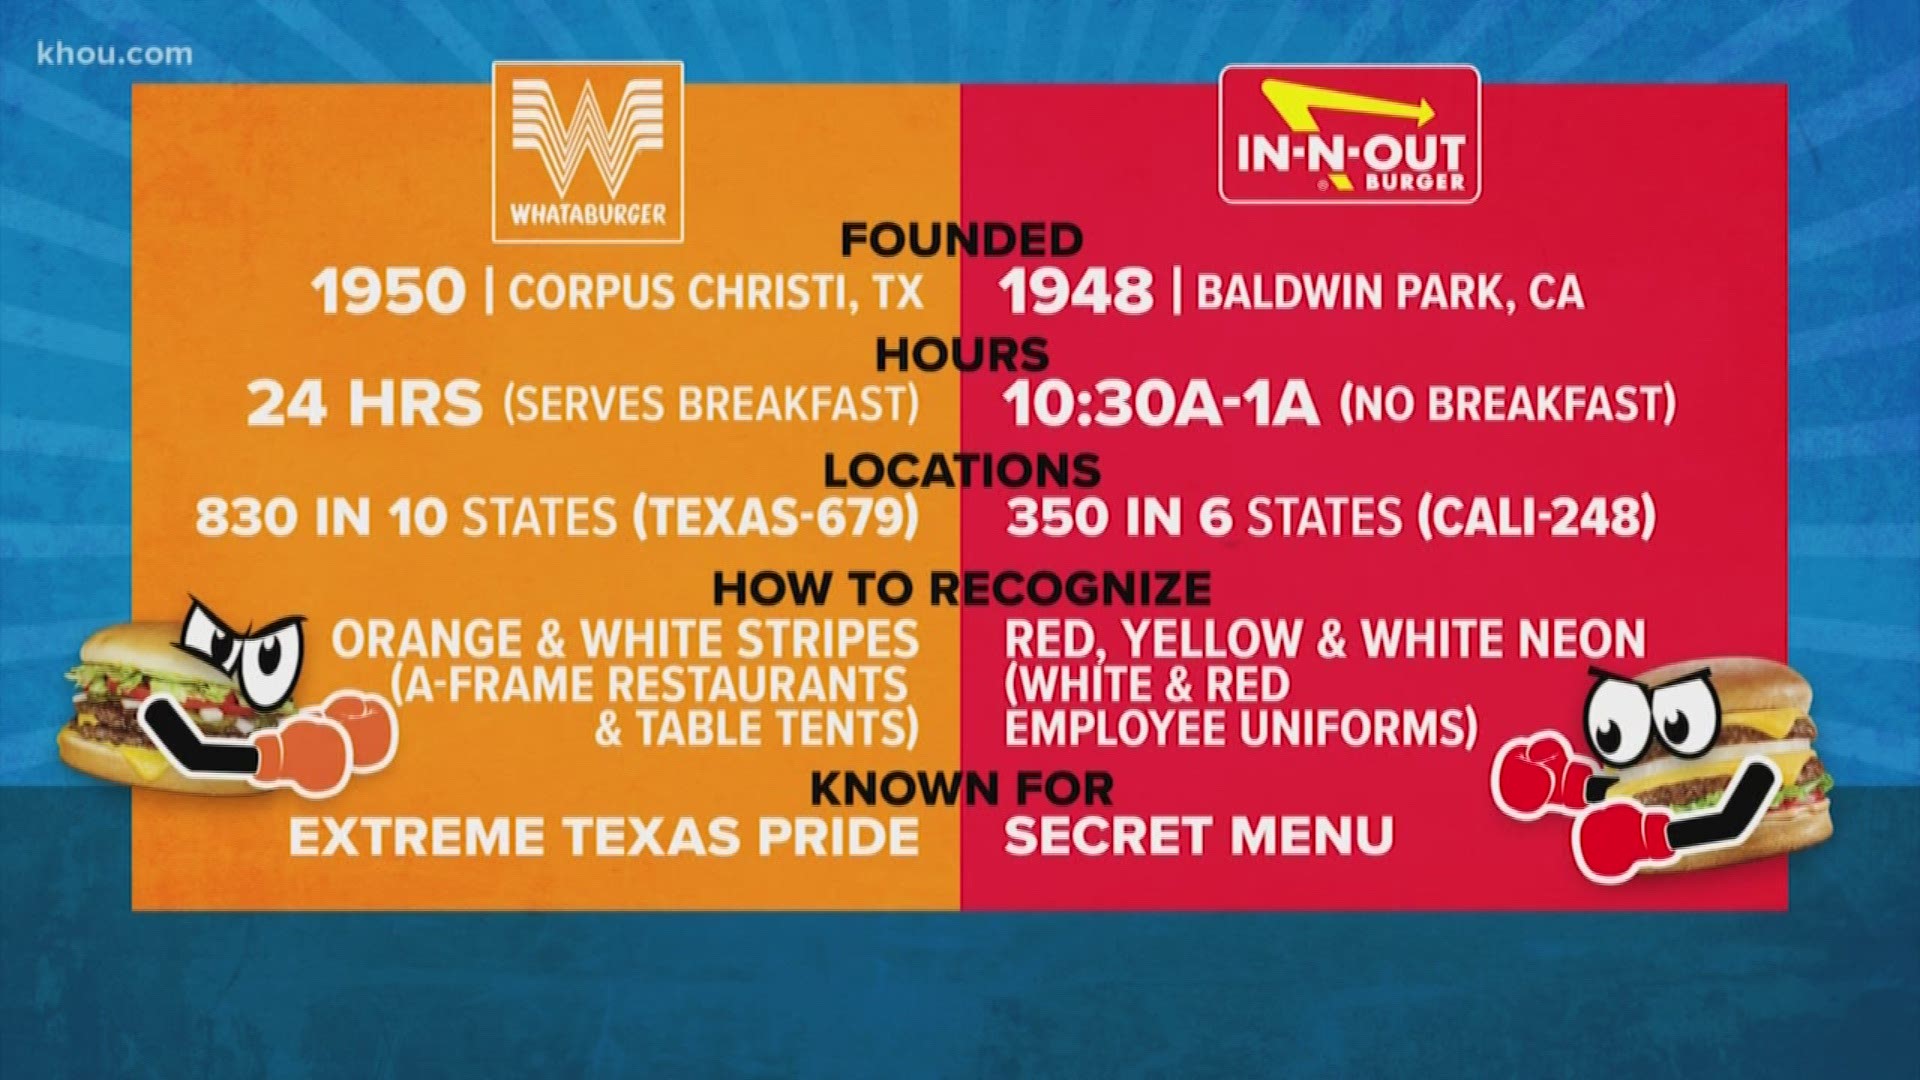 In-N-Out has made its debut in the Houston area. We take a look at the burger chain compared to Texas gem Whataburger.